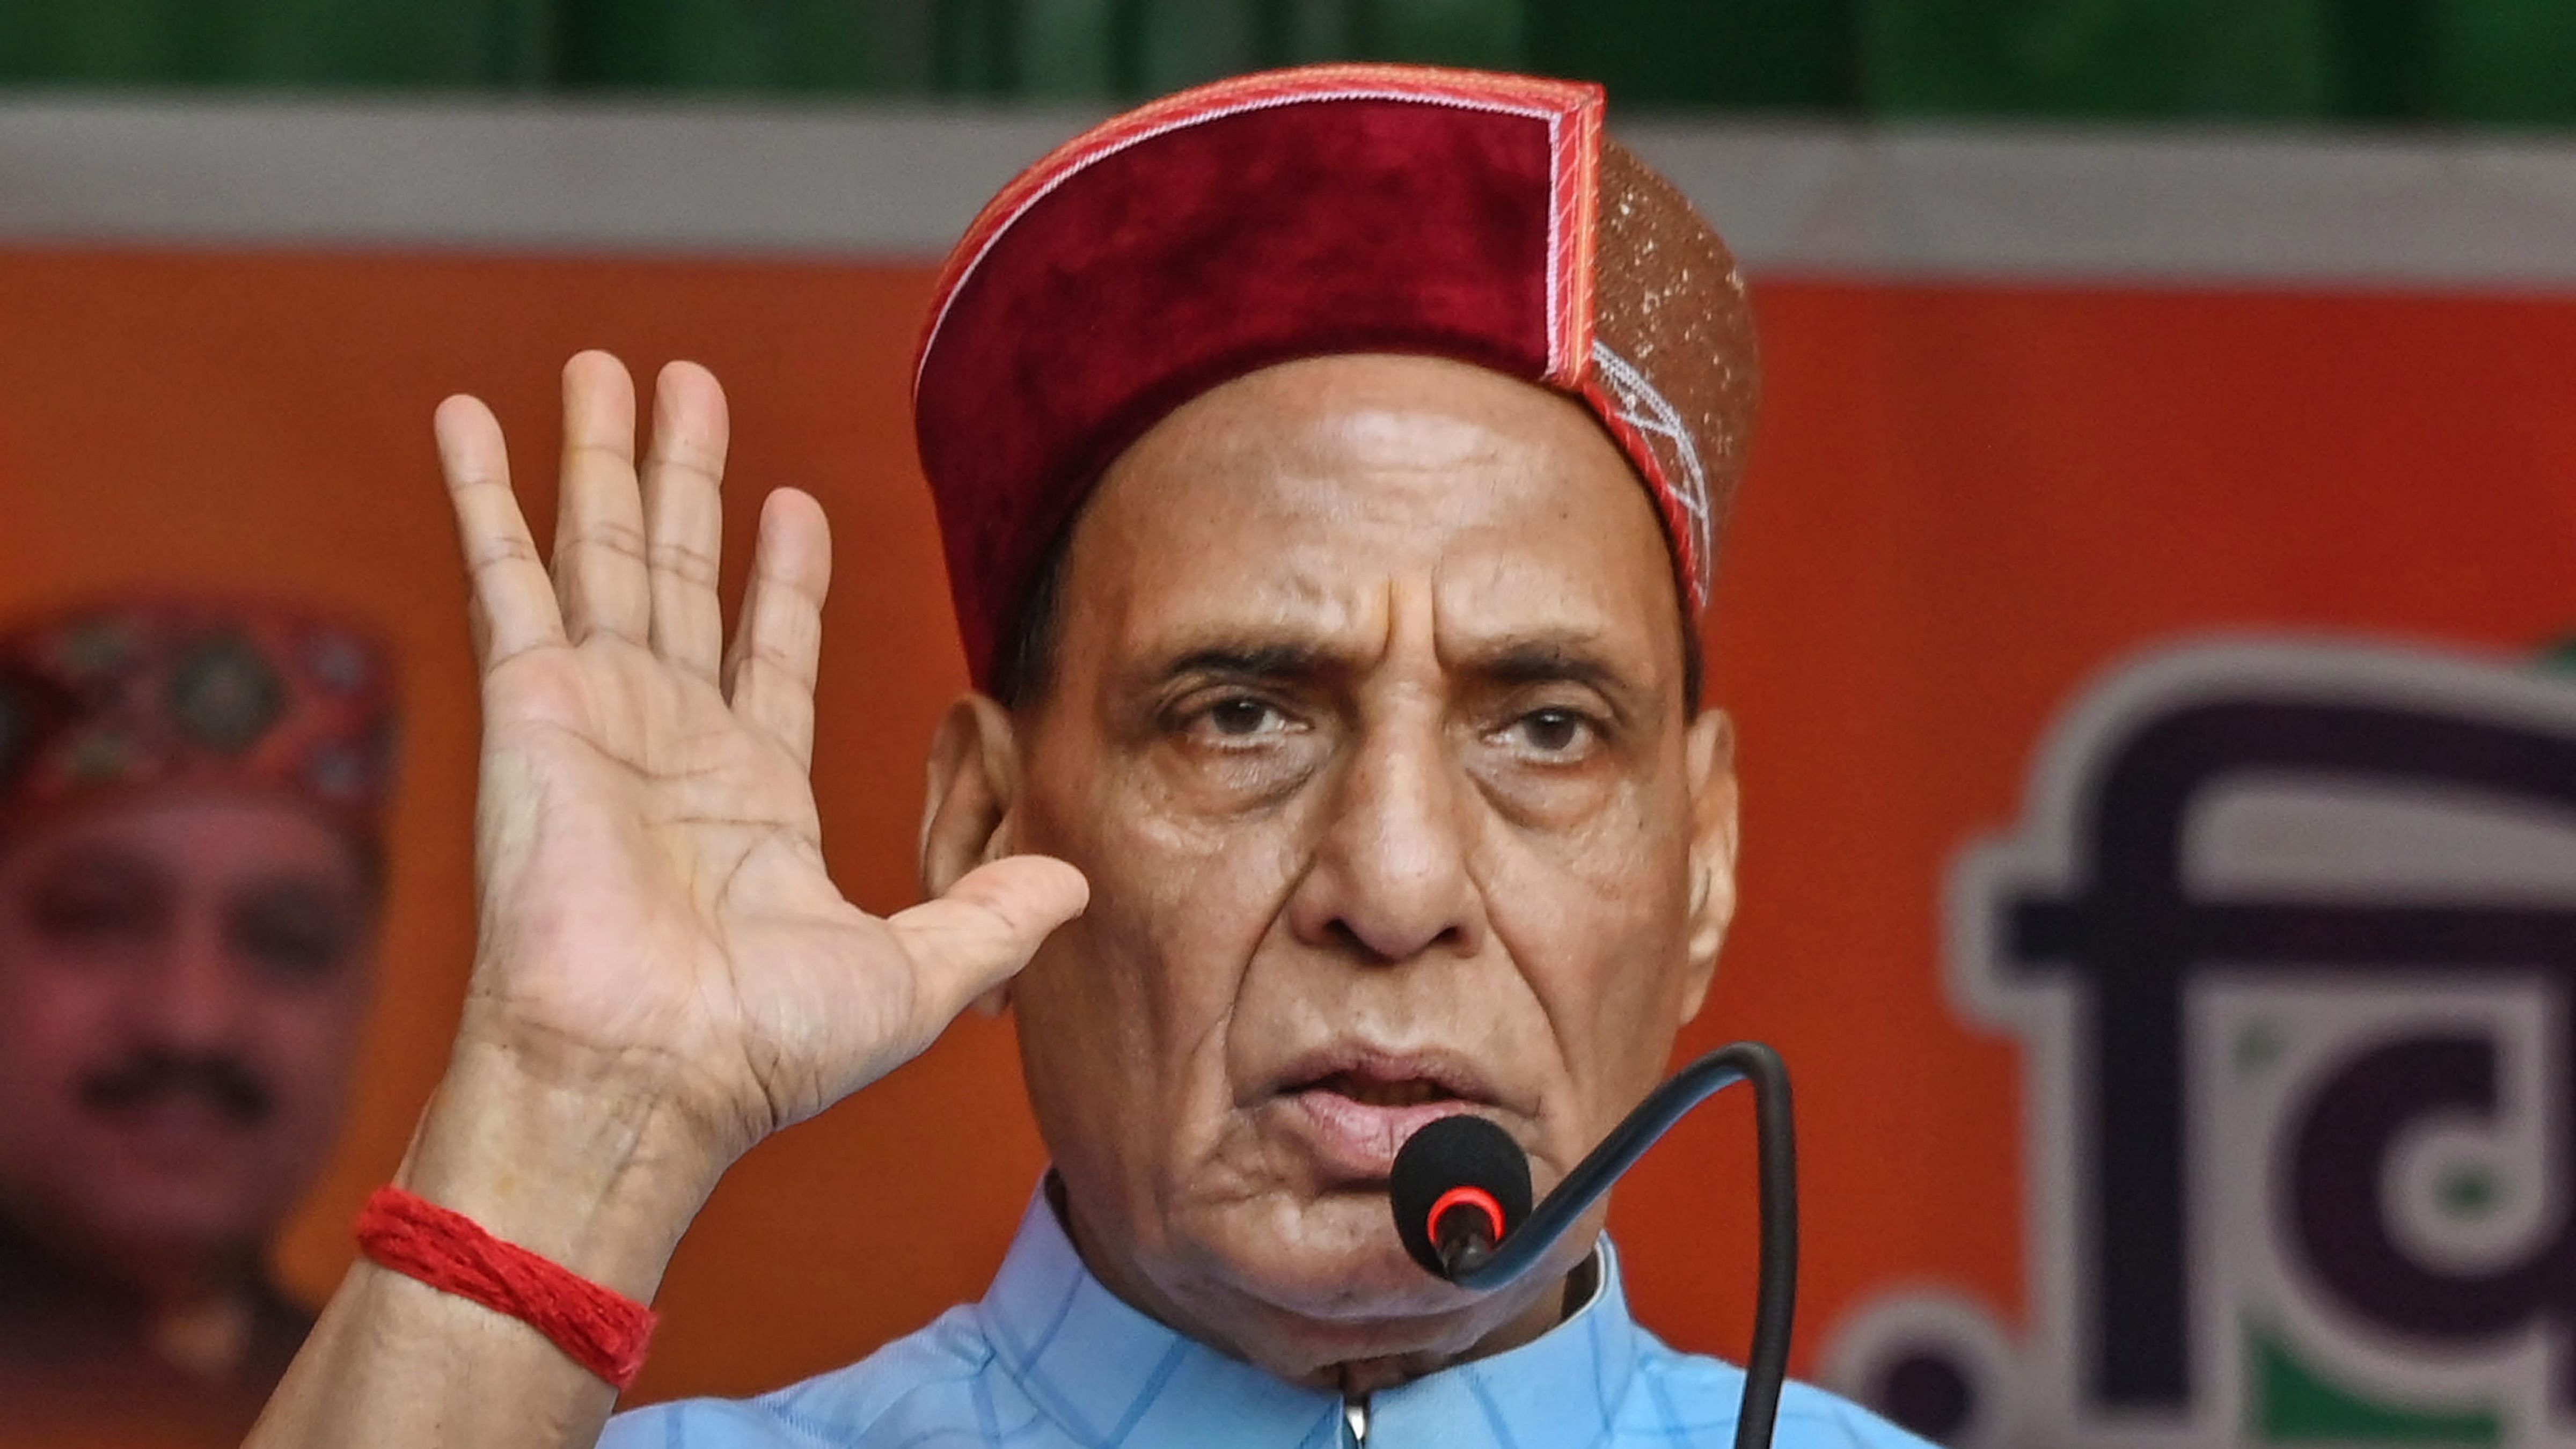 He asserted that BJP's resolve to implement the Uniform Civil Code (UCC) in Himachal Pradesh is not to get votes. Credit: PTI Photo